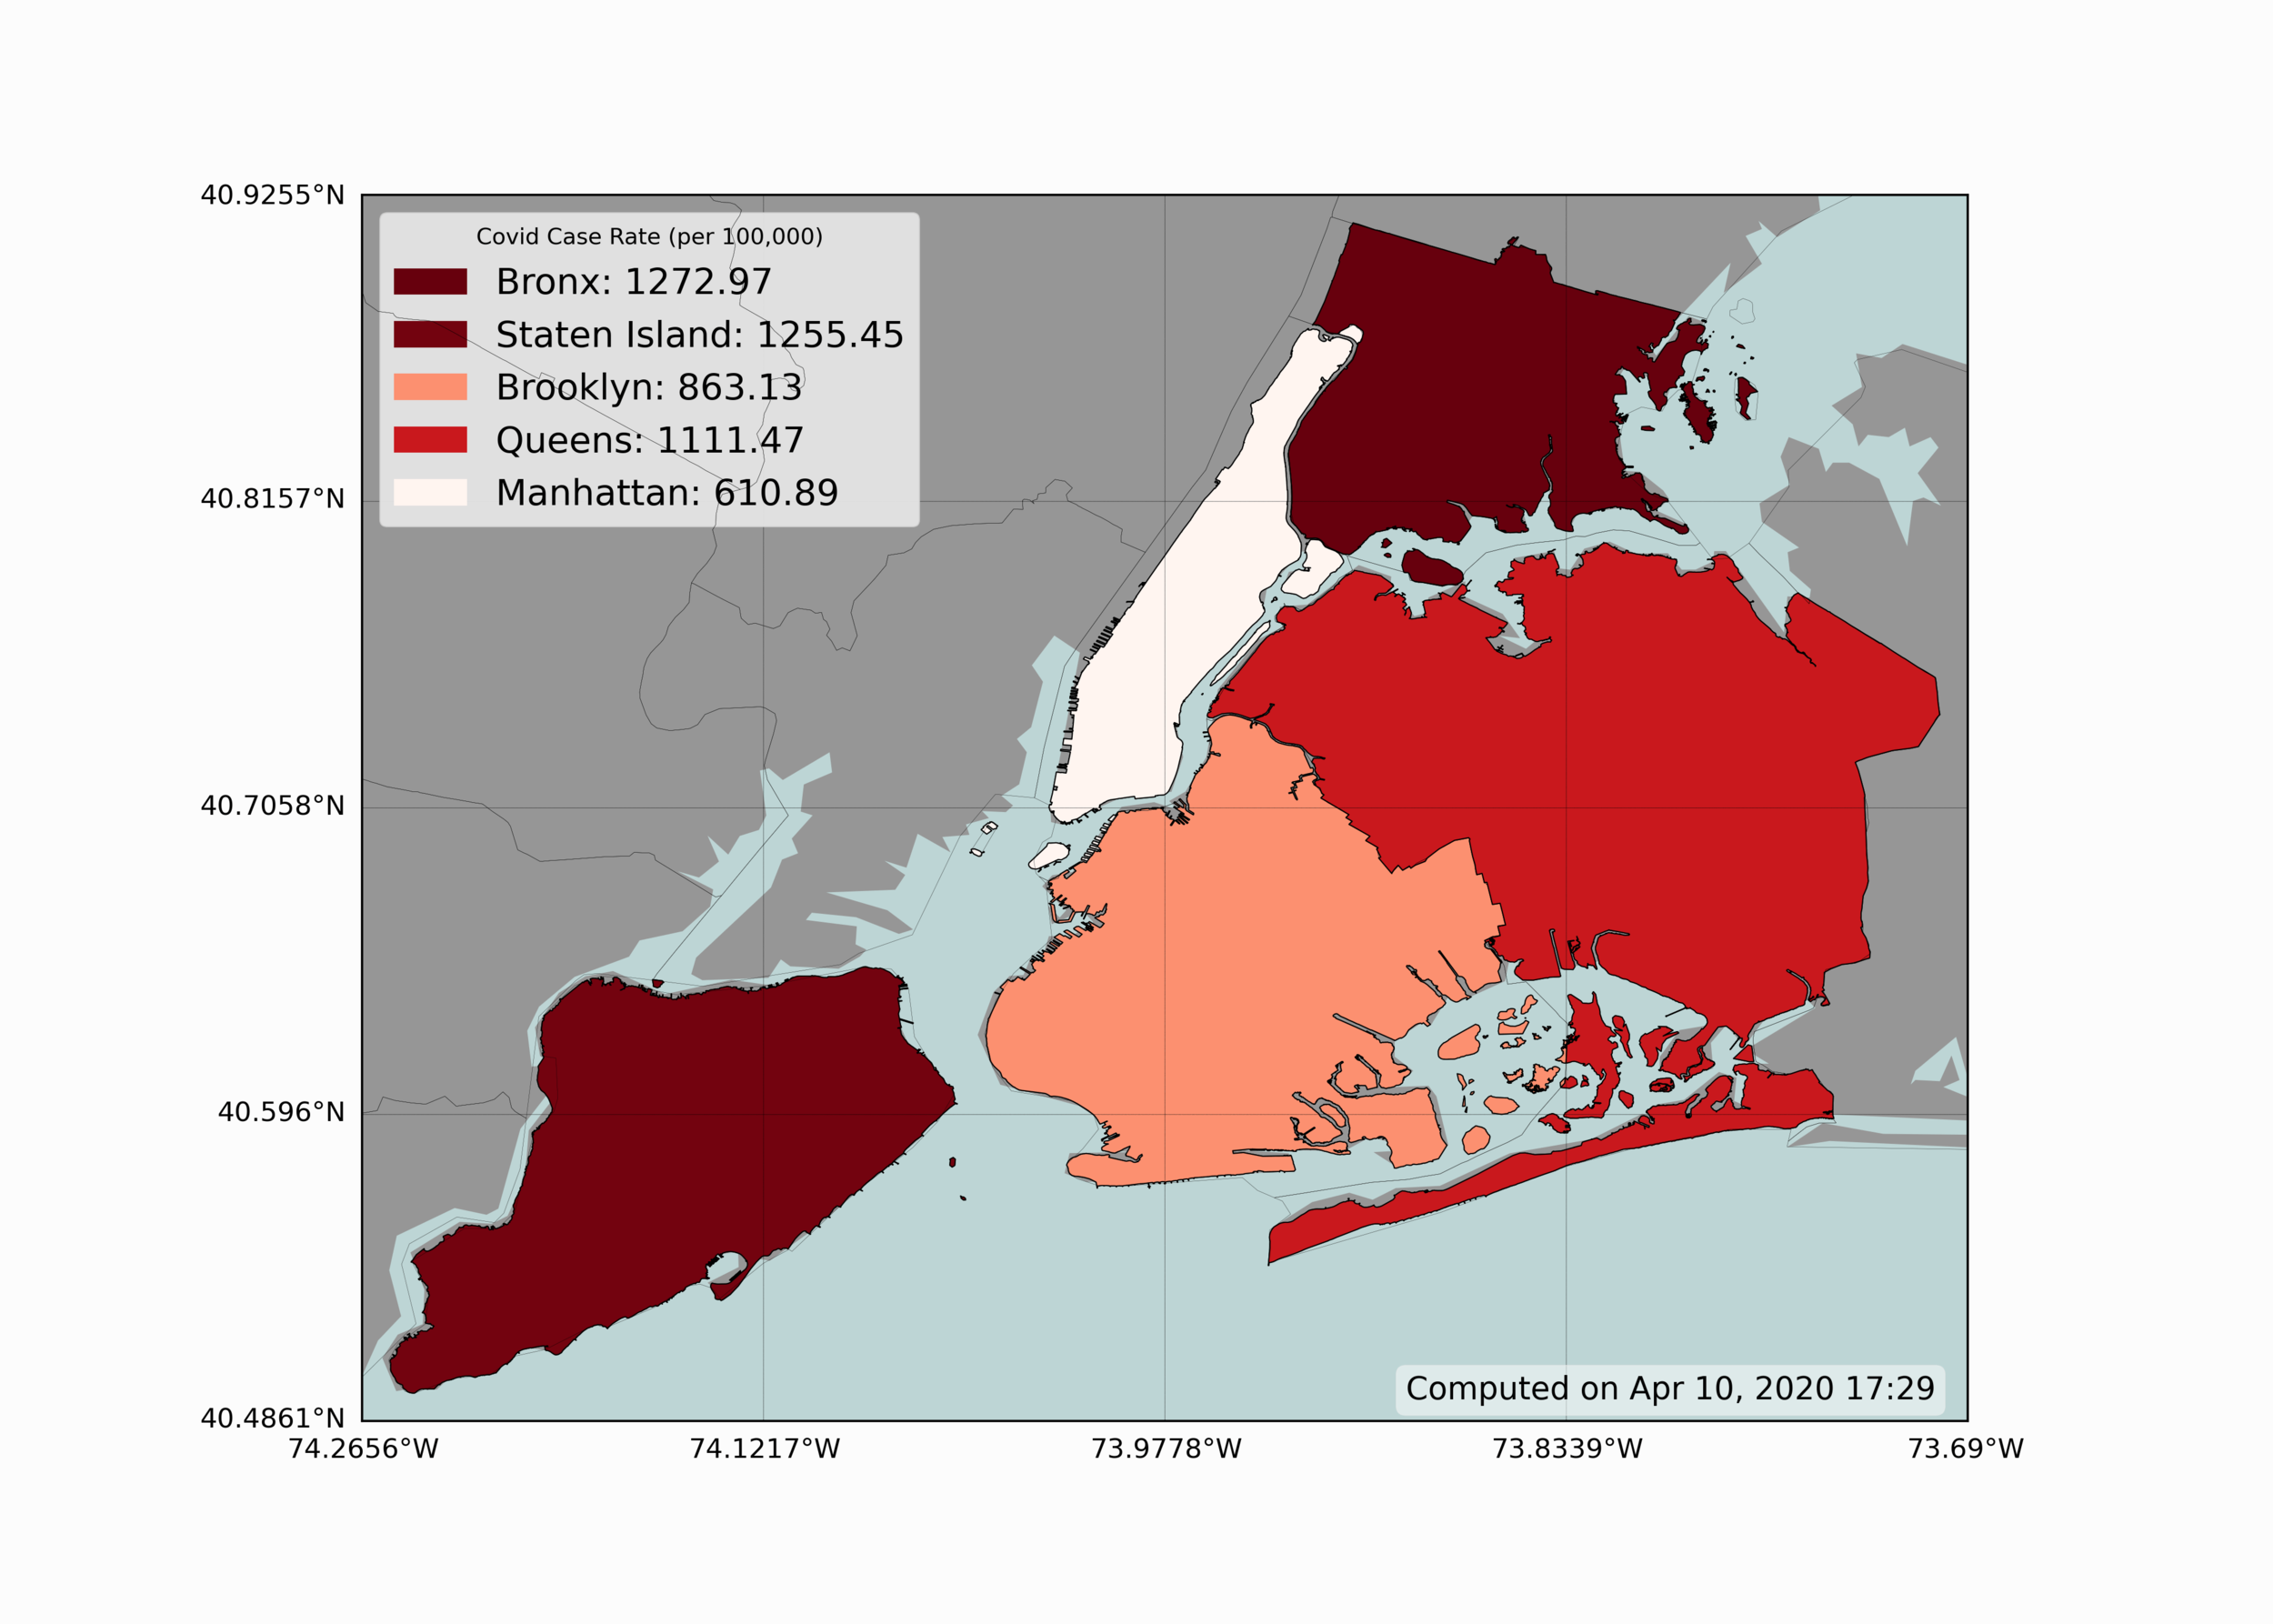 Geographic Distribution of COVID-19 Rates by NYC Borough